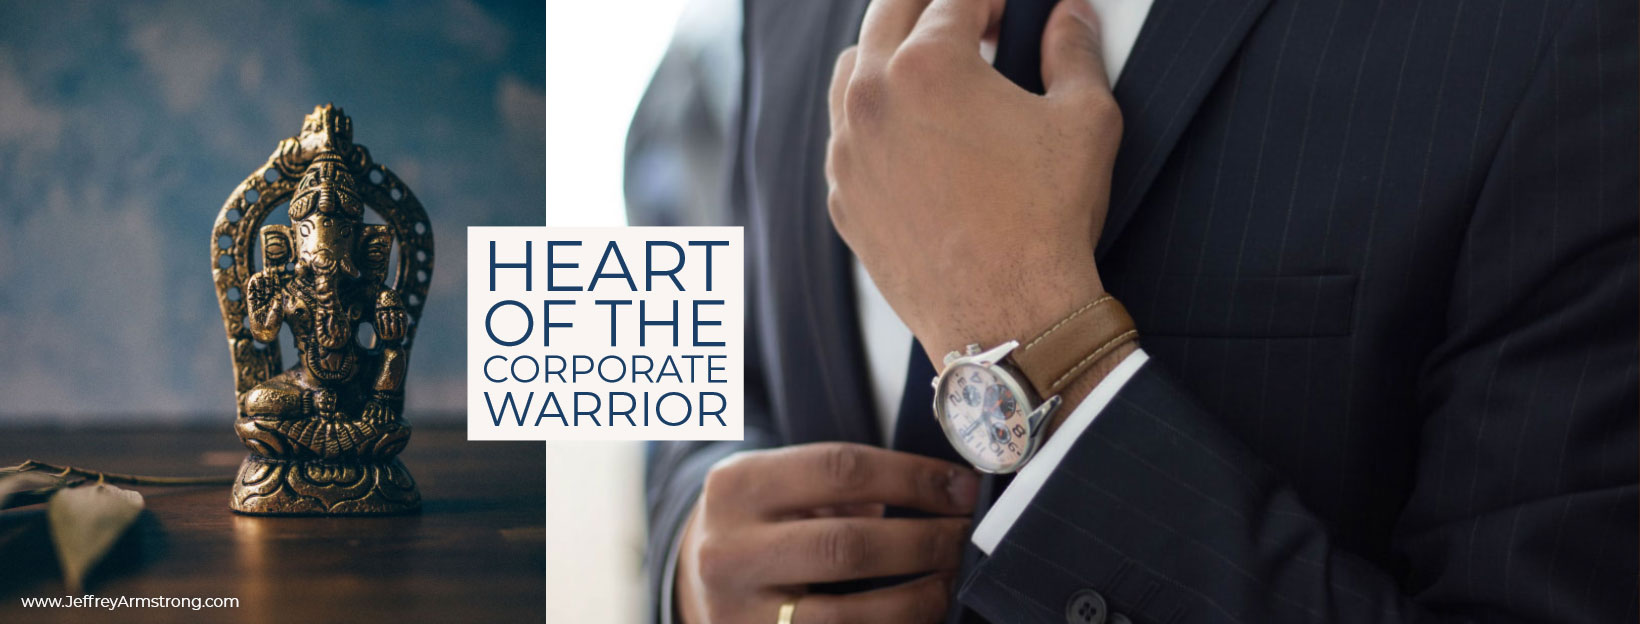 The Heart of the Corporate Warrior